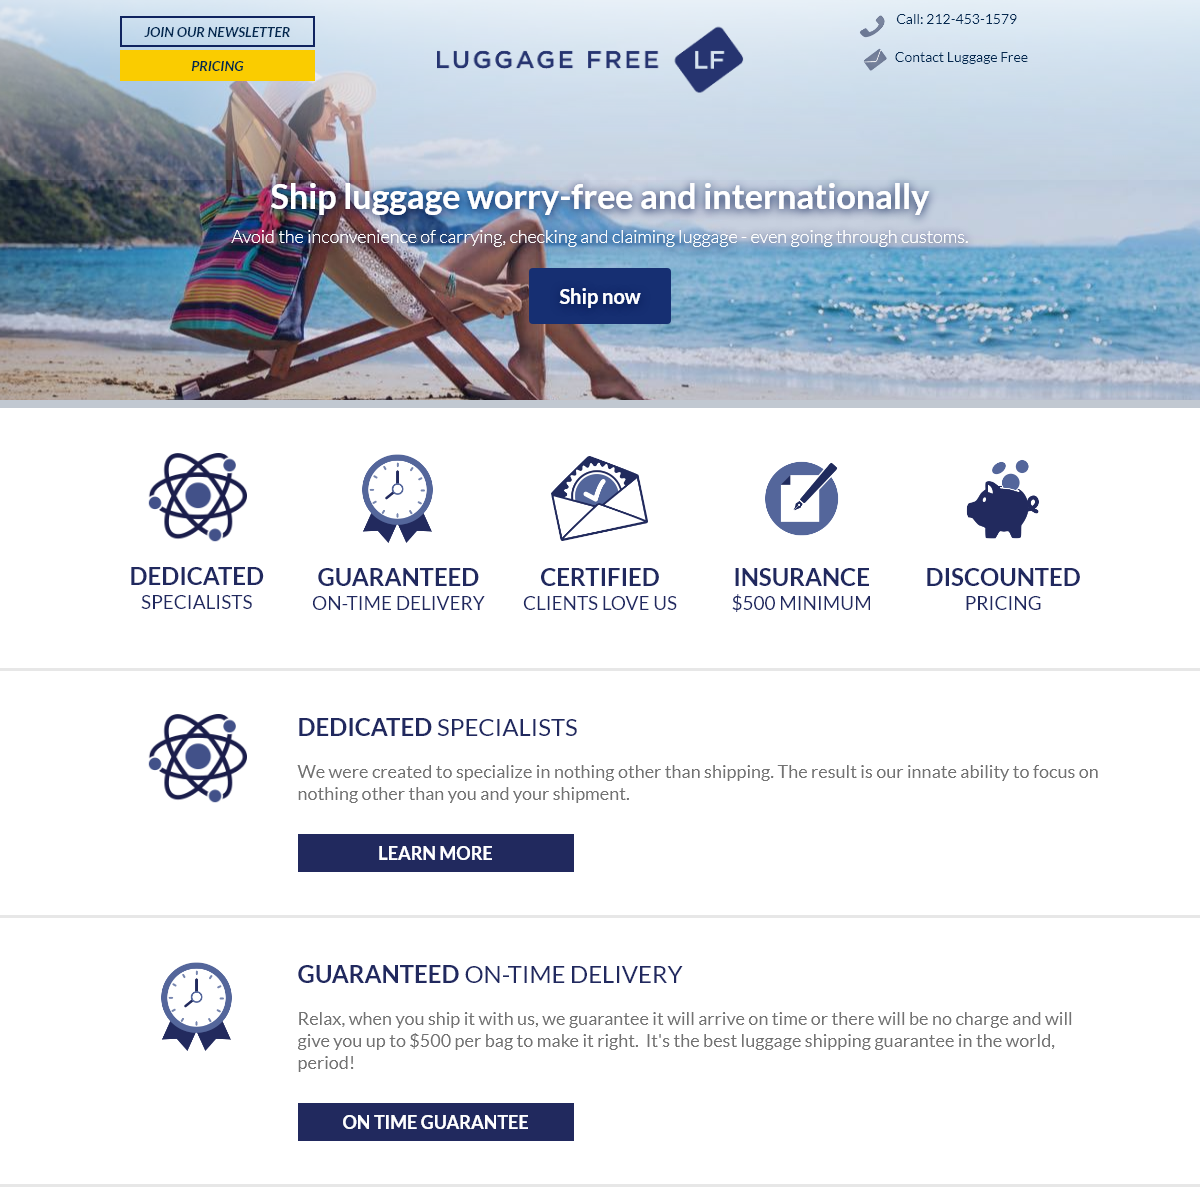 A complete backup of luggagefree.com